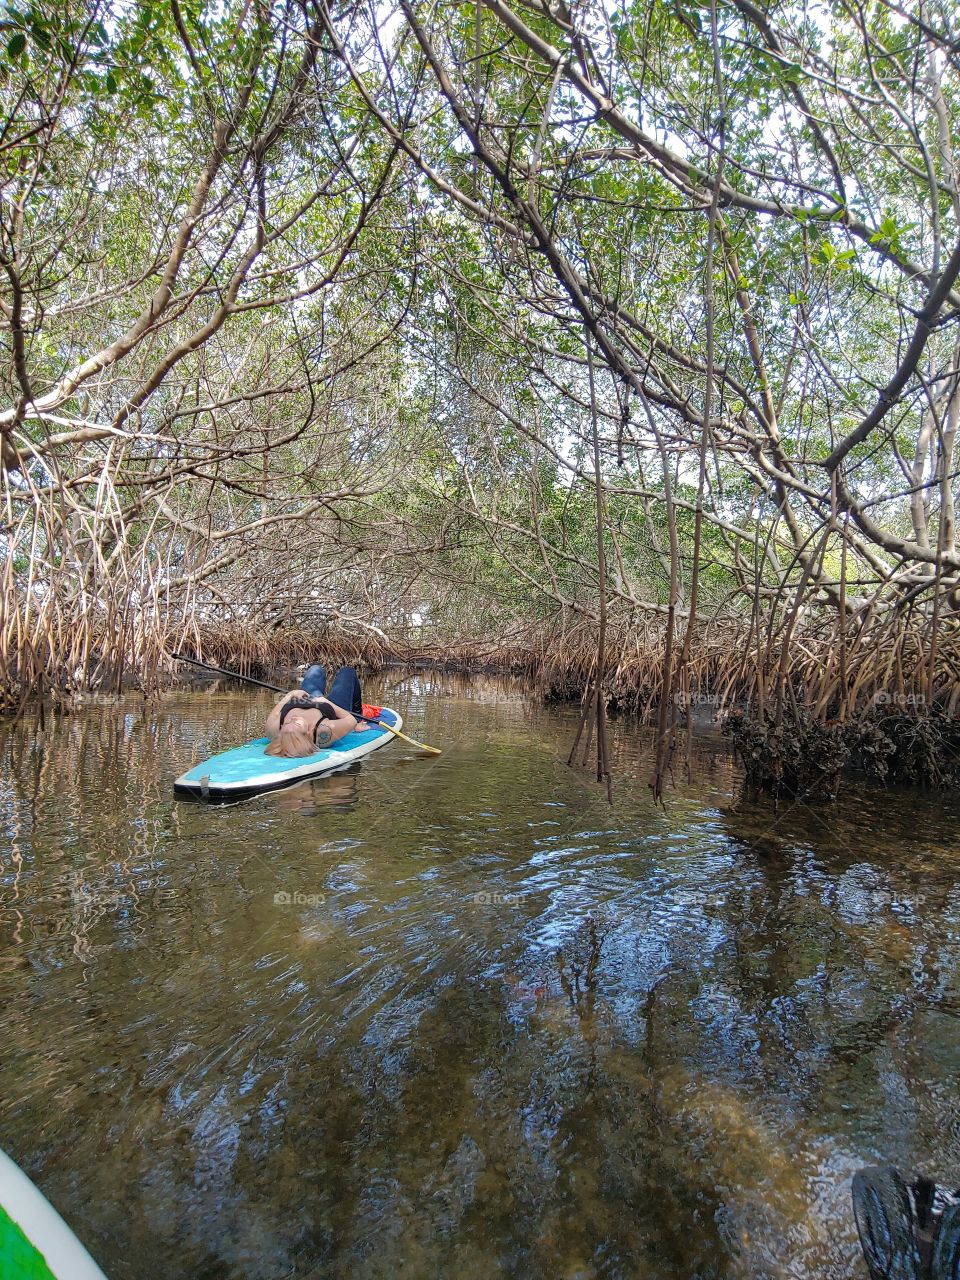 gliding through some mangroves. the usual